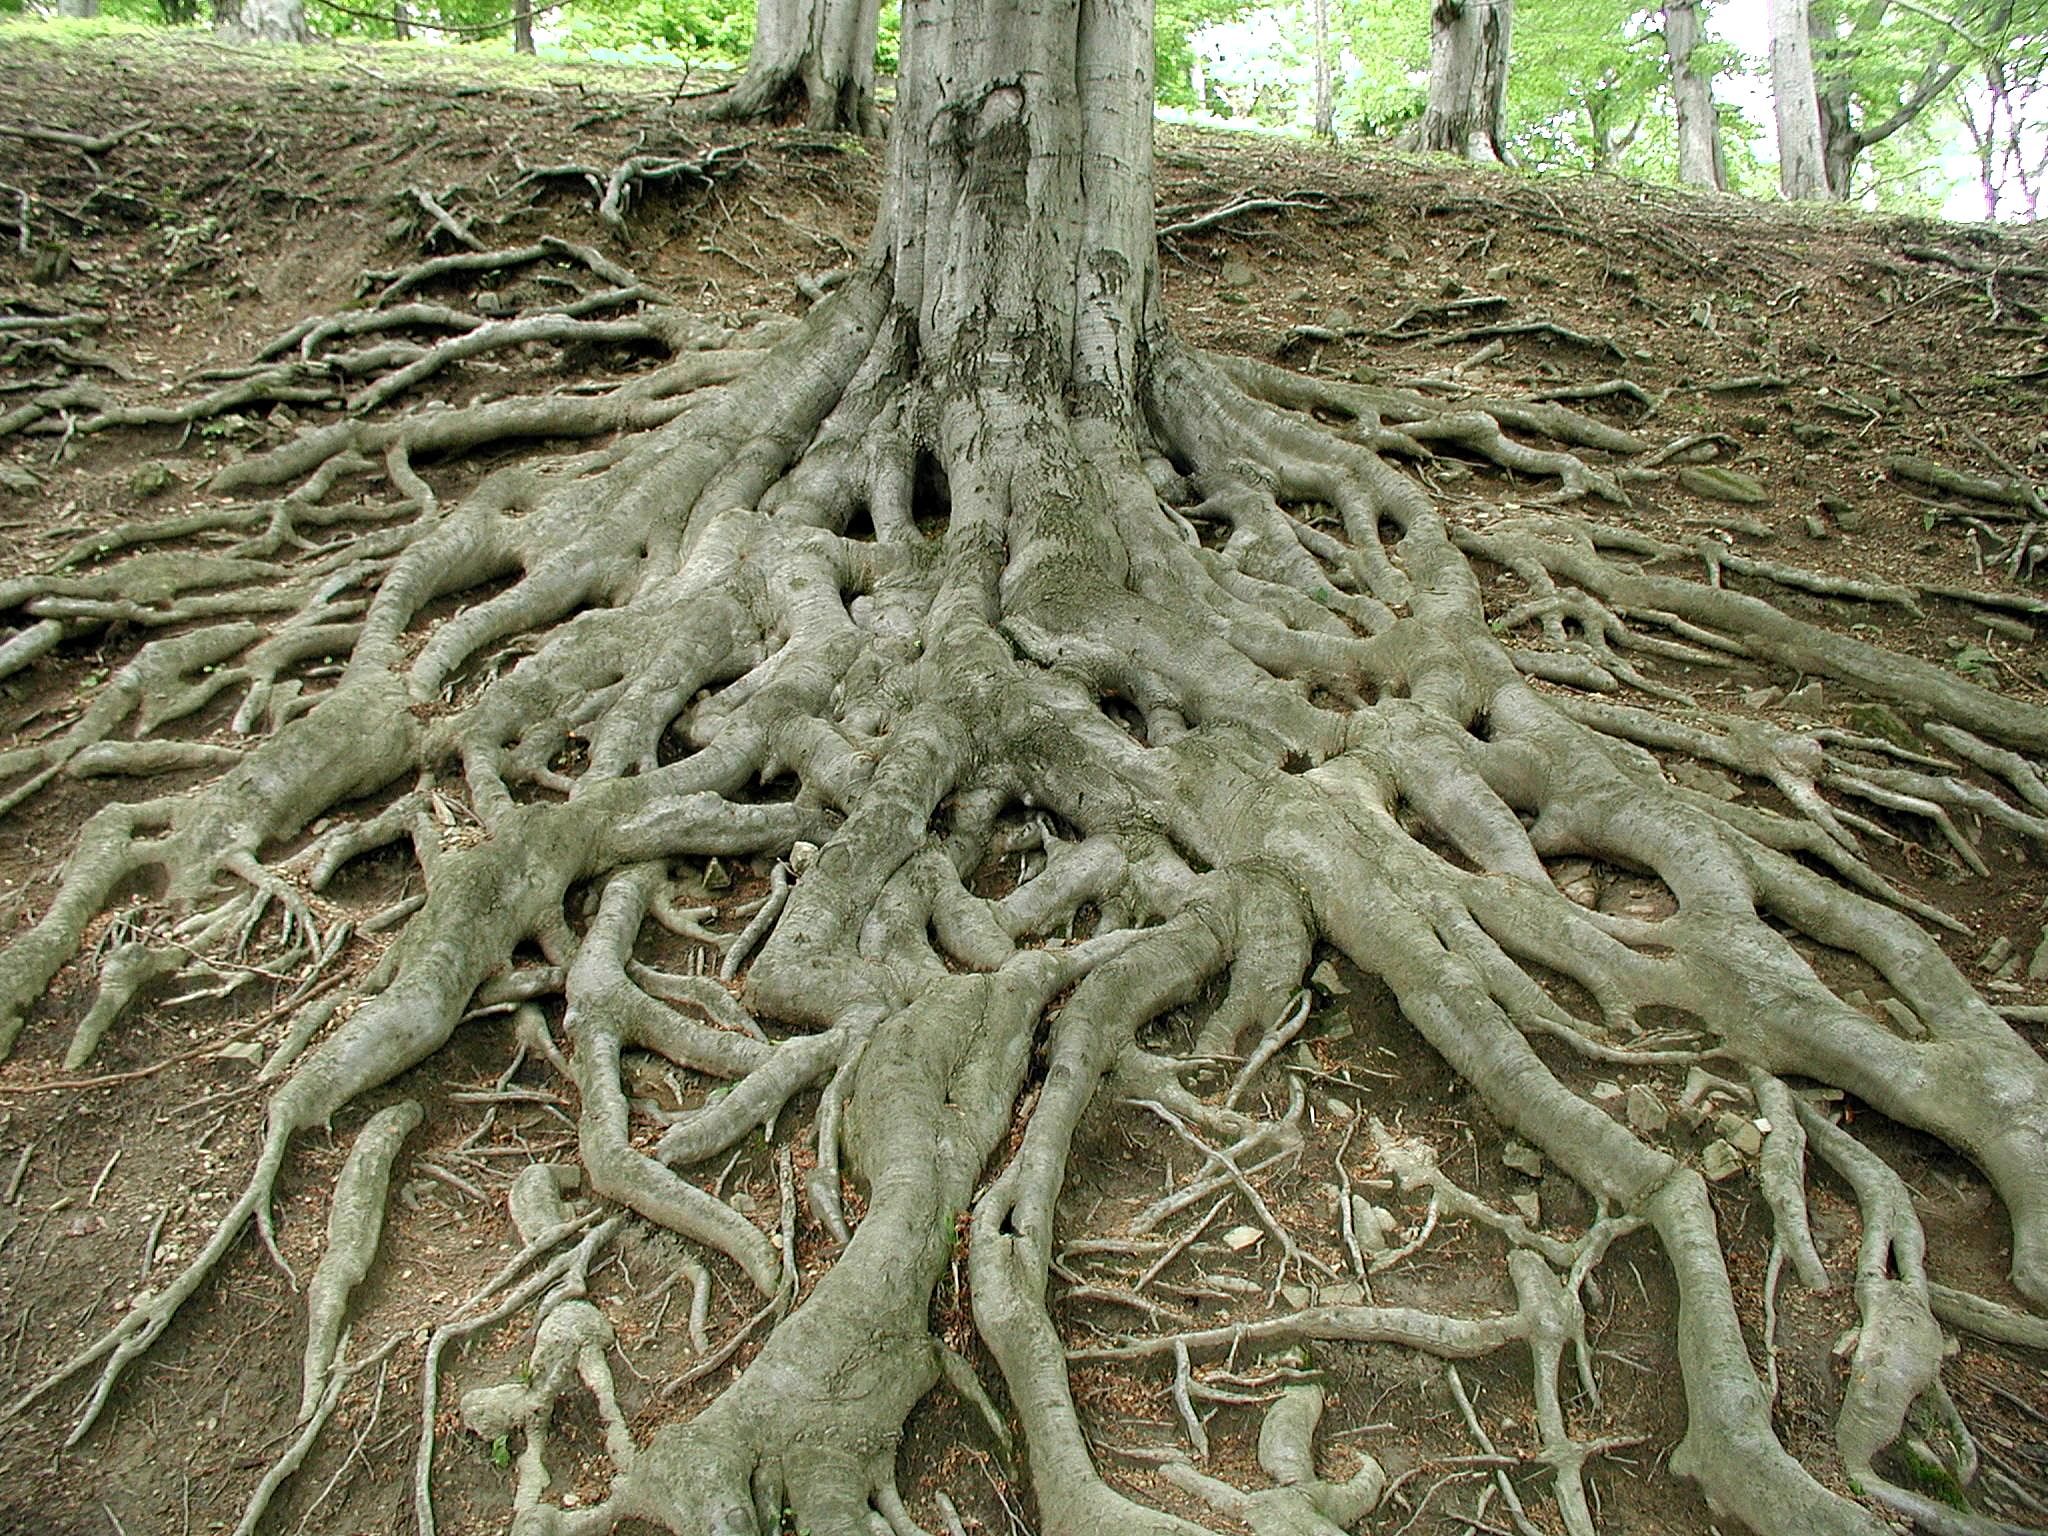 File:Roots of big old tree.jpg - Wikimedia Commons